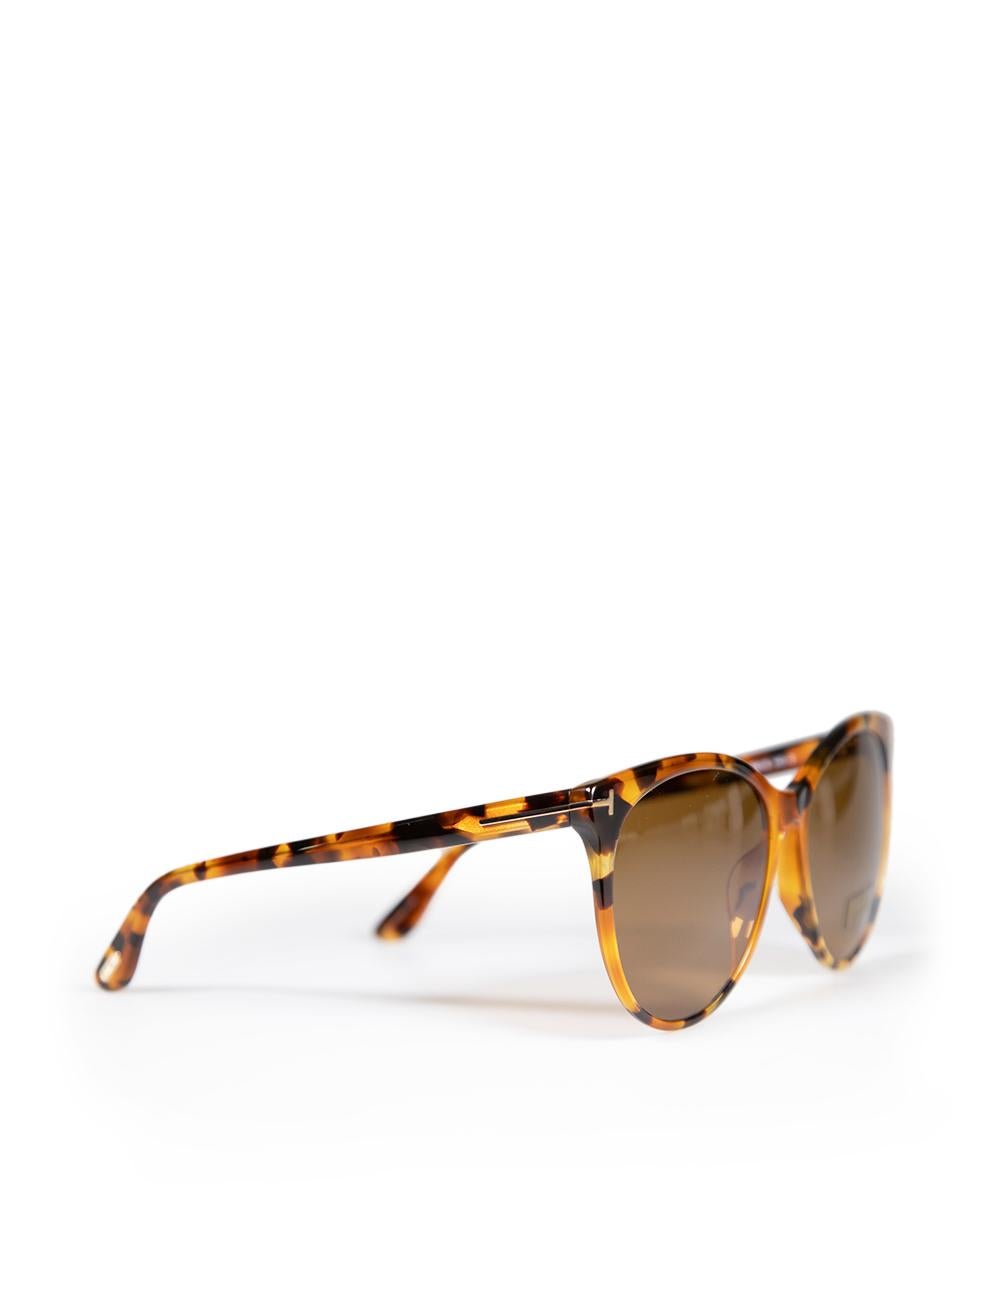 Tom Ford Coloured Havana Maxim Sunglasses In New Condition For Sale In London, GB